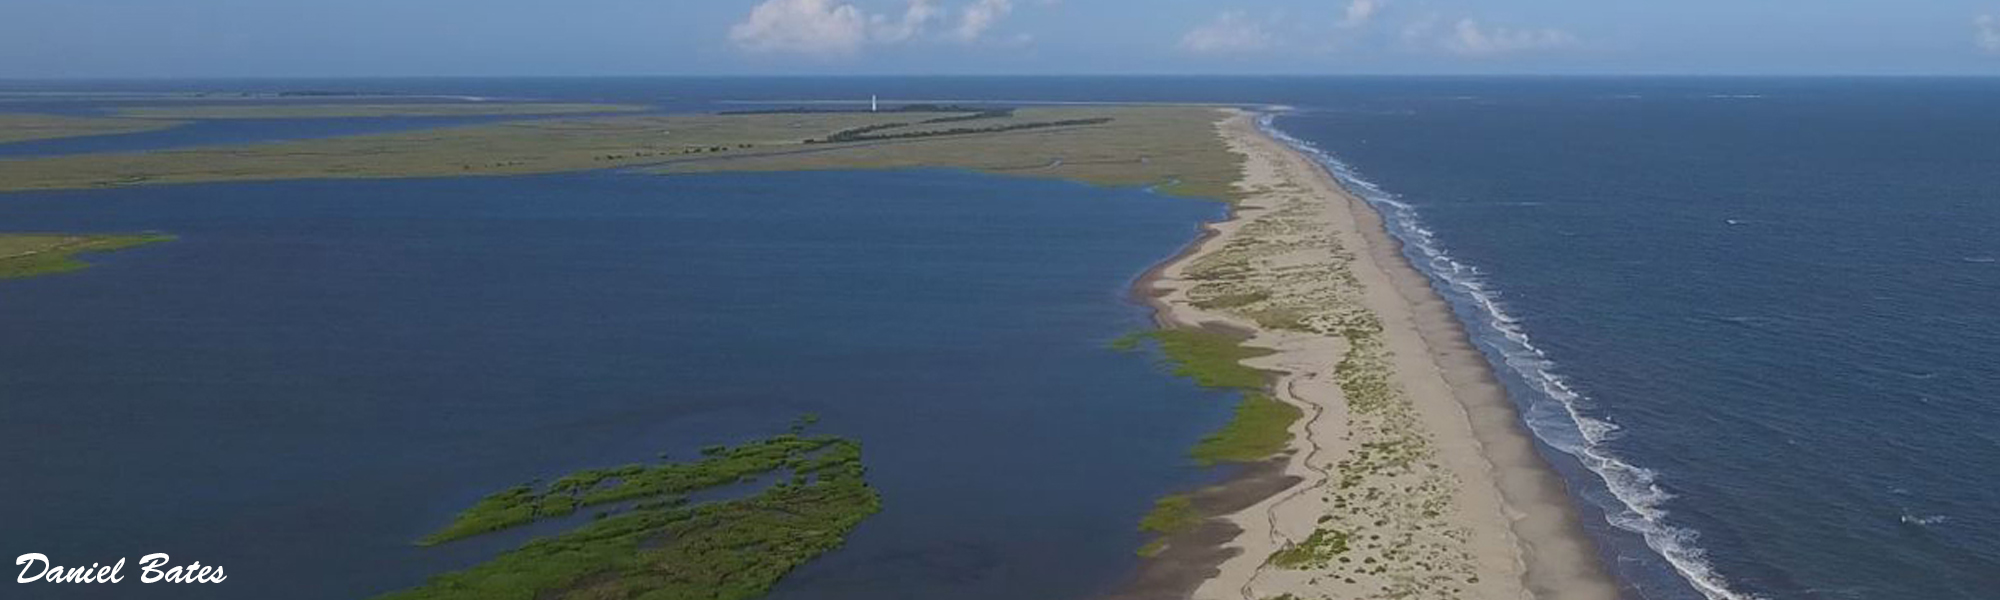 Southend of Lighthouse Island in Cape Romain Wildlife Refuge